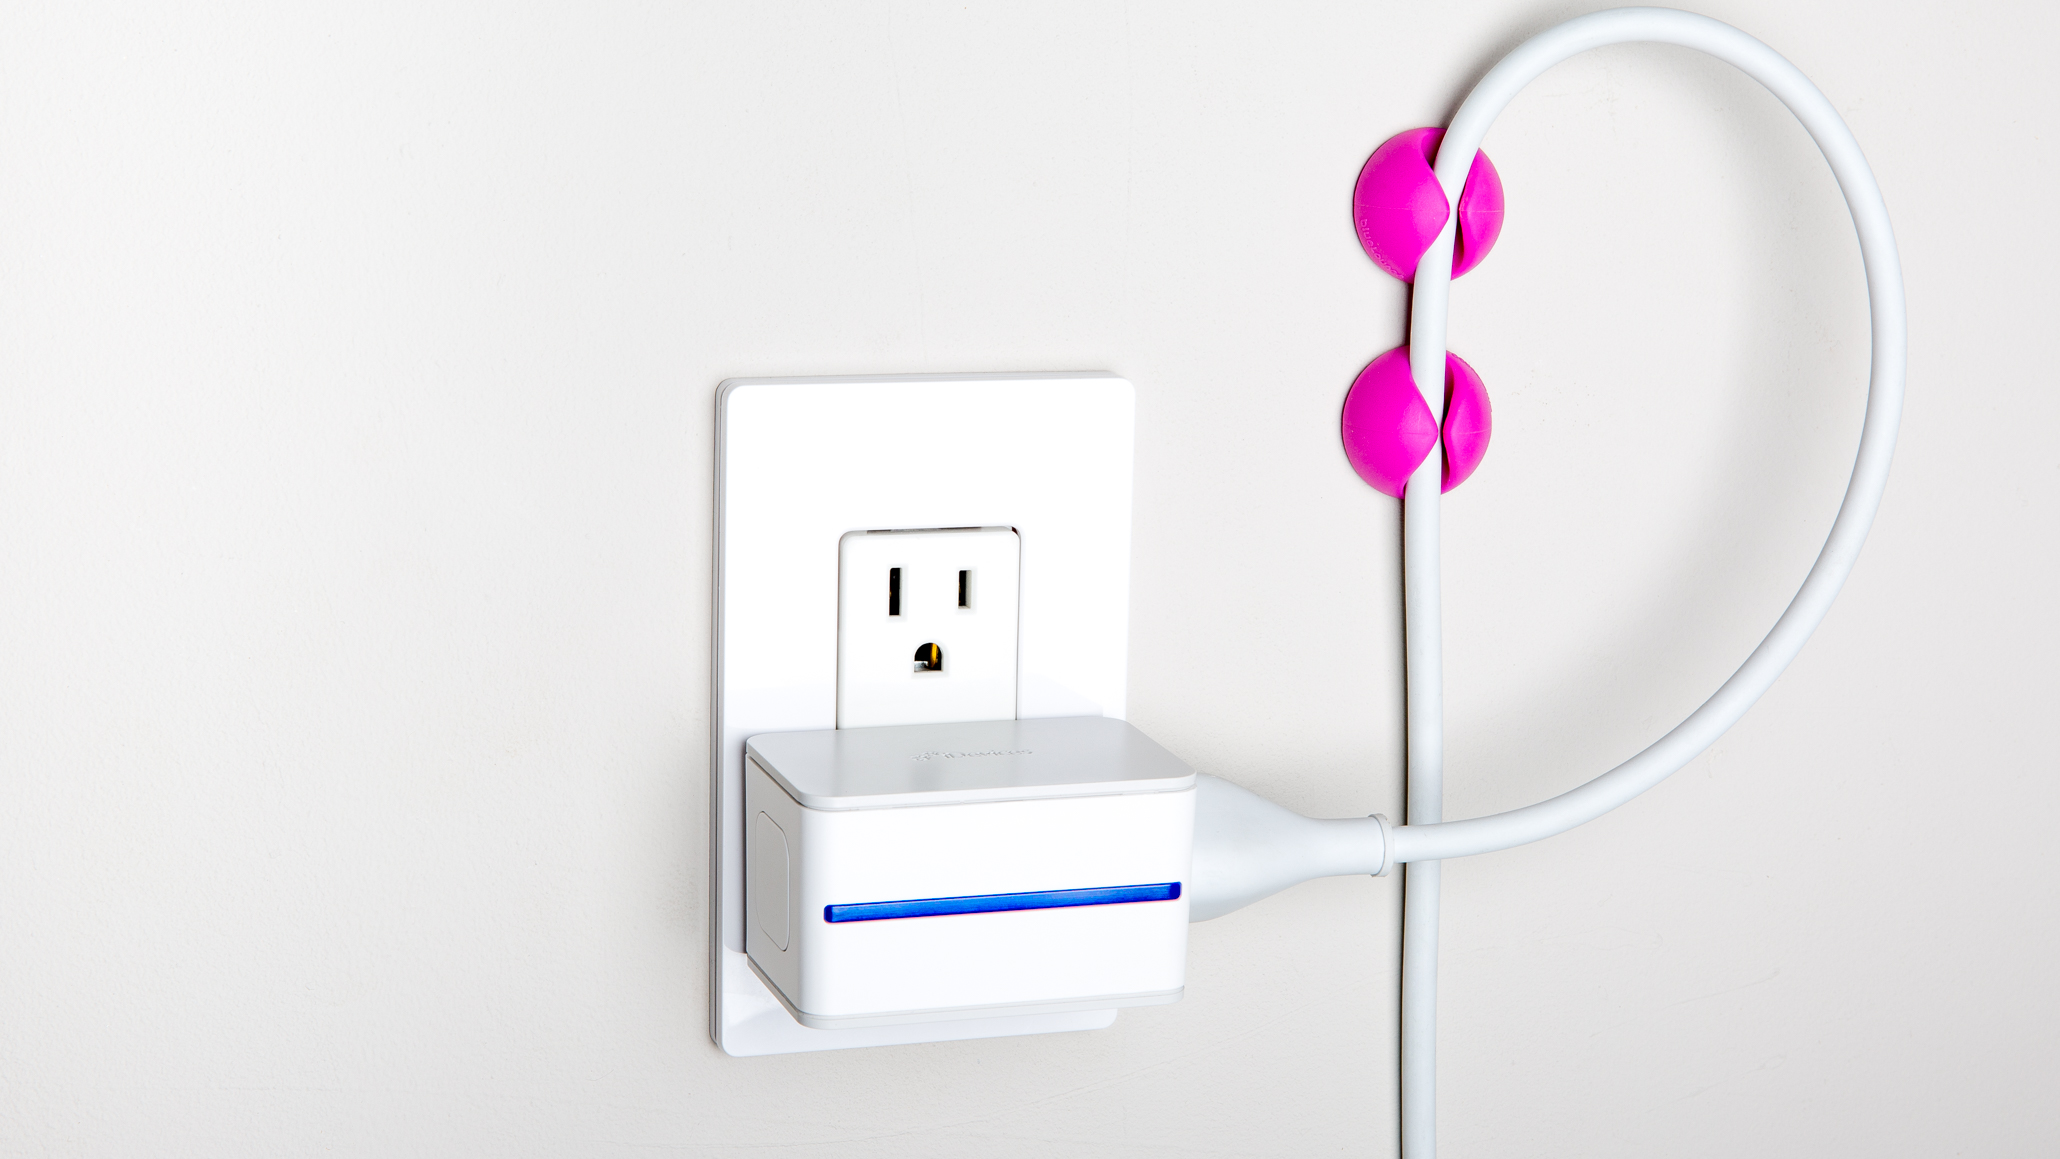 By connecting small appliances through a smart plug, the attached device can be turned off and on remotely from your smartphone. The iDevices Switch shown here works through the iDevices Connected app, Amazon Alexa digital assistant, Apple HomeKit, and other systems. Image: Digitized House Media.